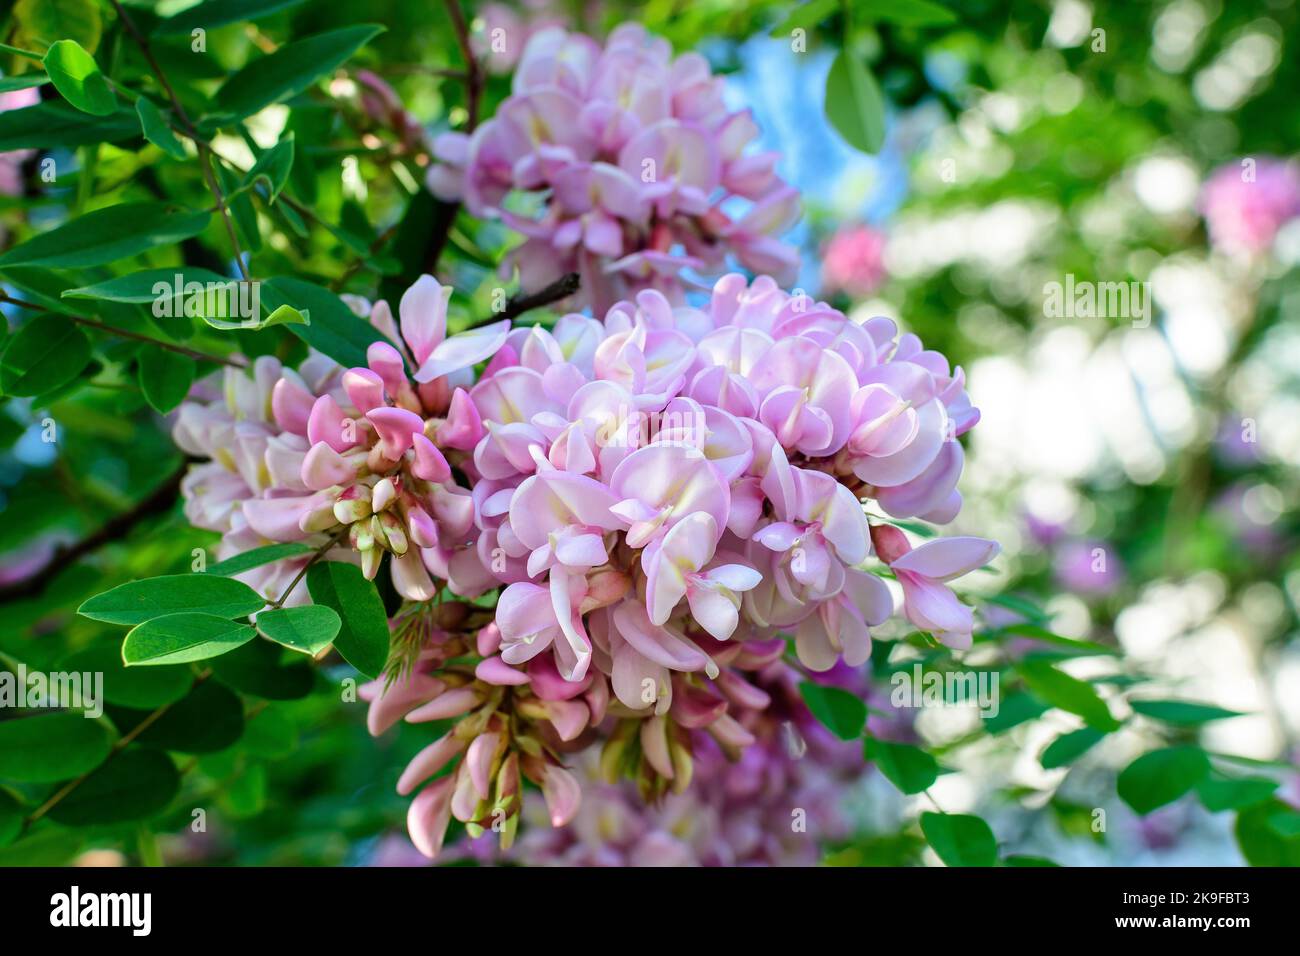 Pink flowers of Robinia margaretta Casque Rouge tree commonly known as locust, and green leaves in a summer garden, beautiful outdoor floral backgroun Stock Photo